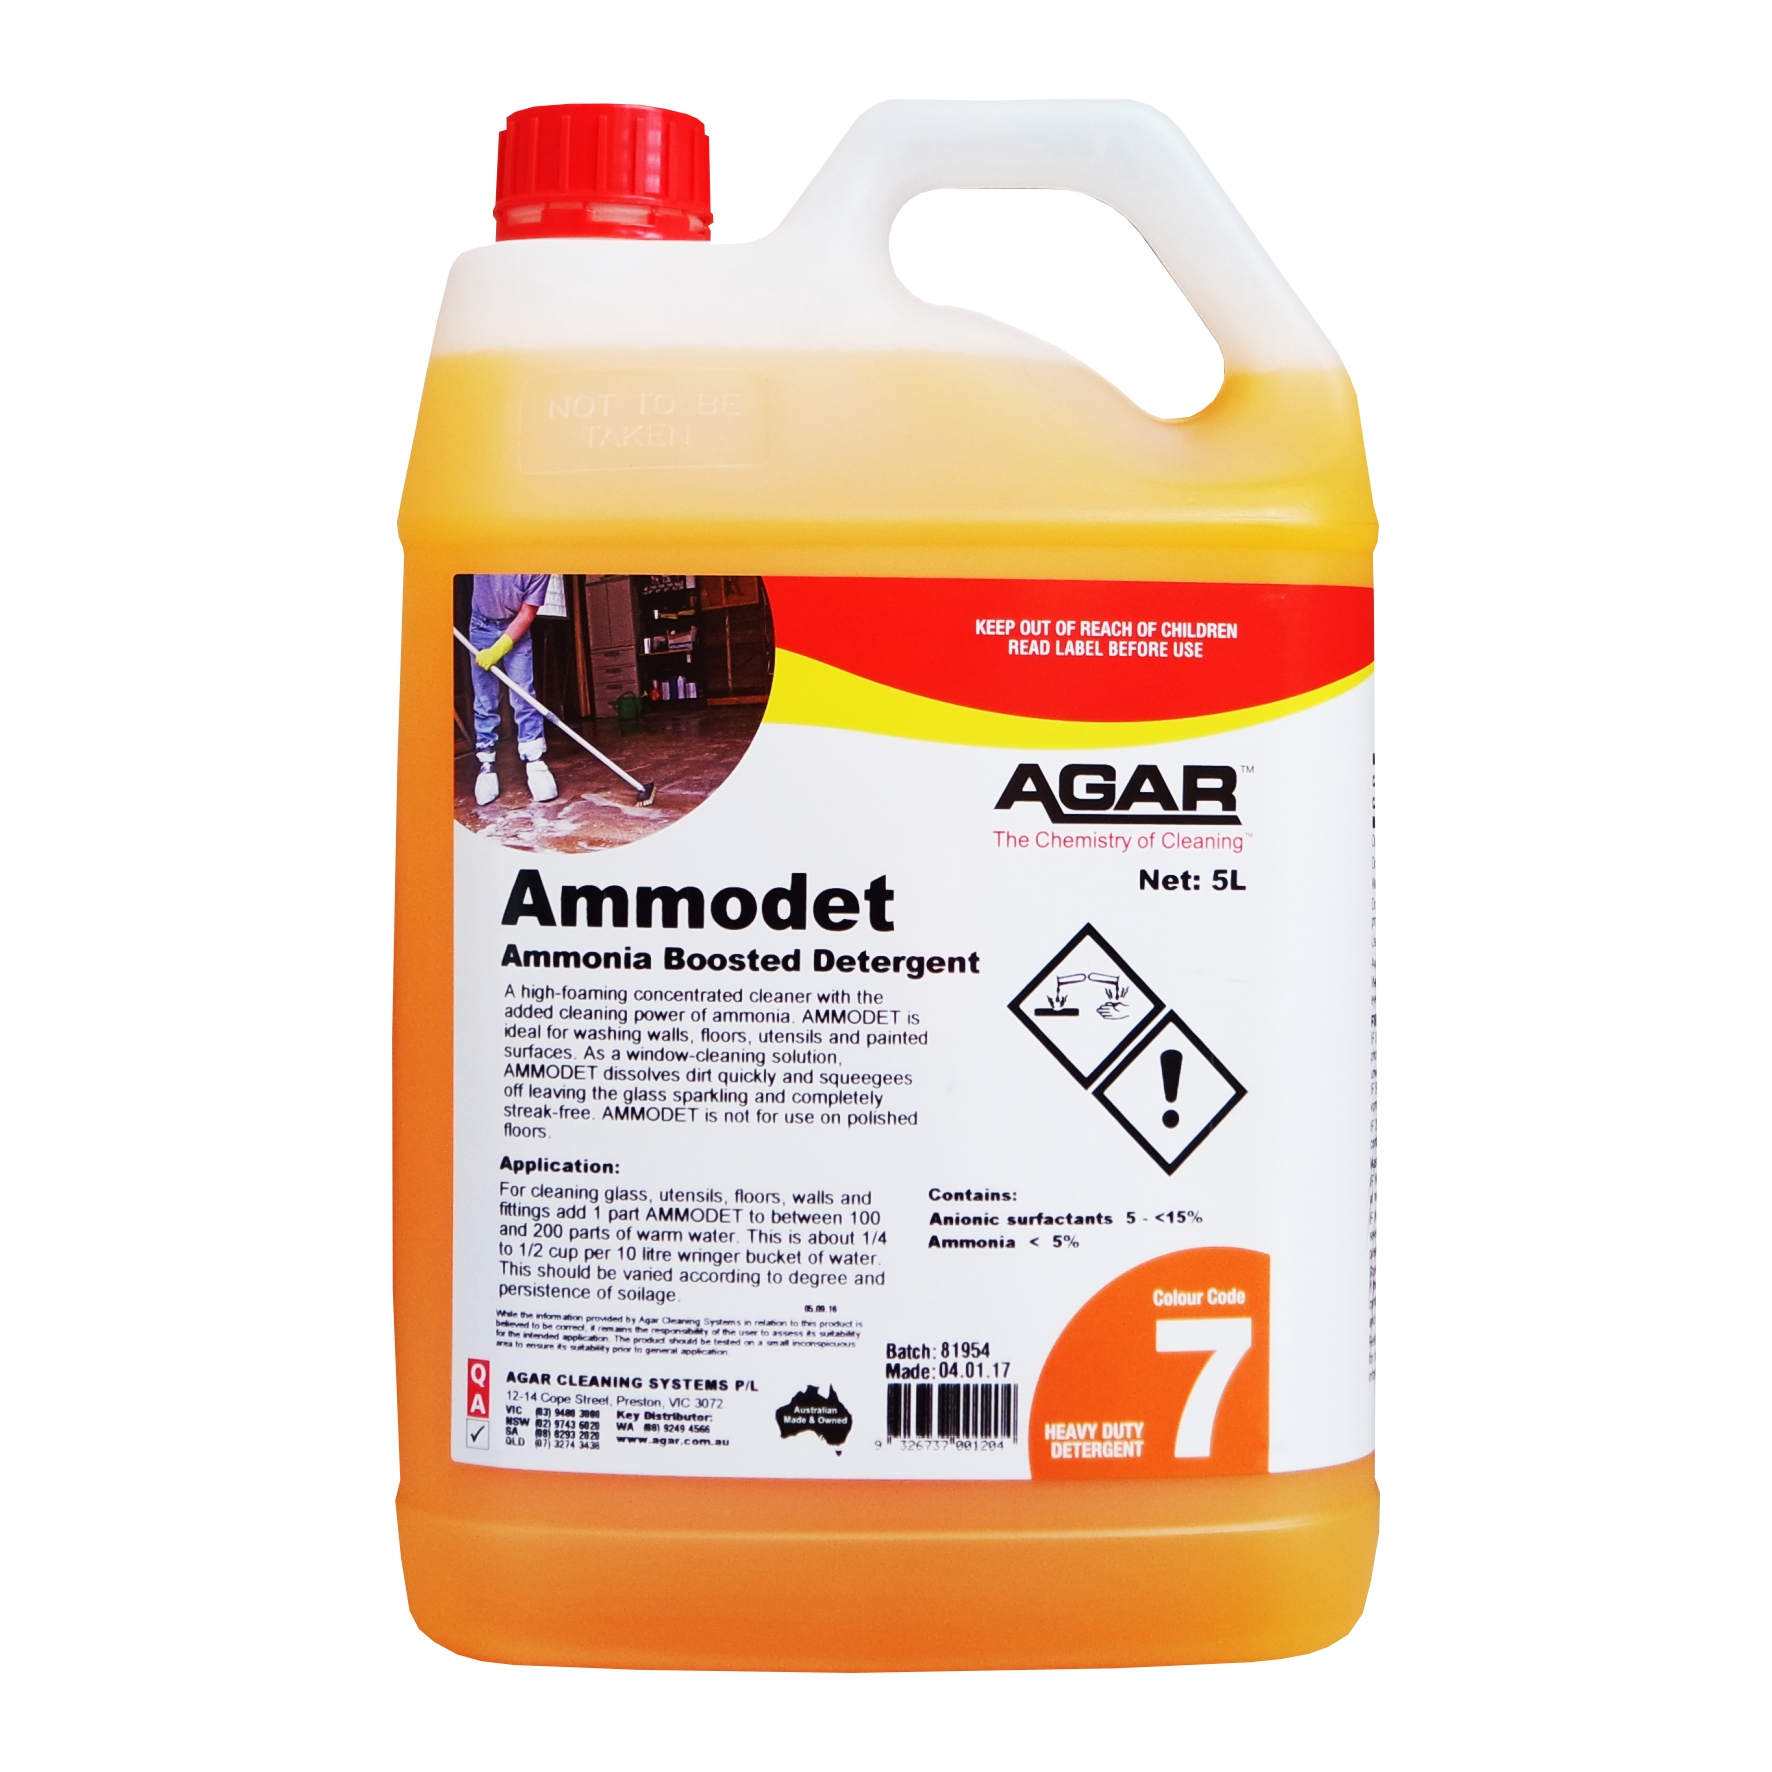 Agar Ammodet Foam Concentrated Cleaner